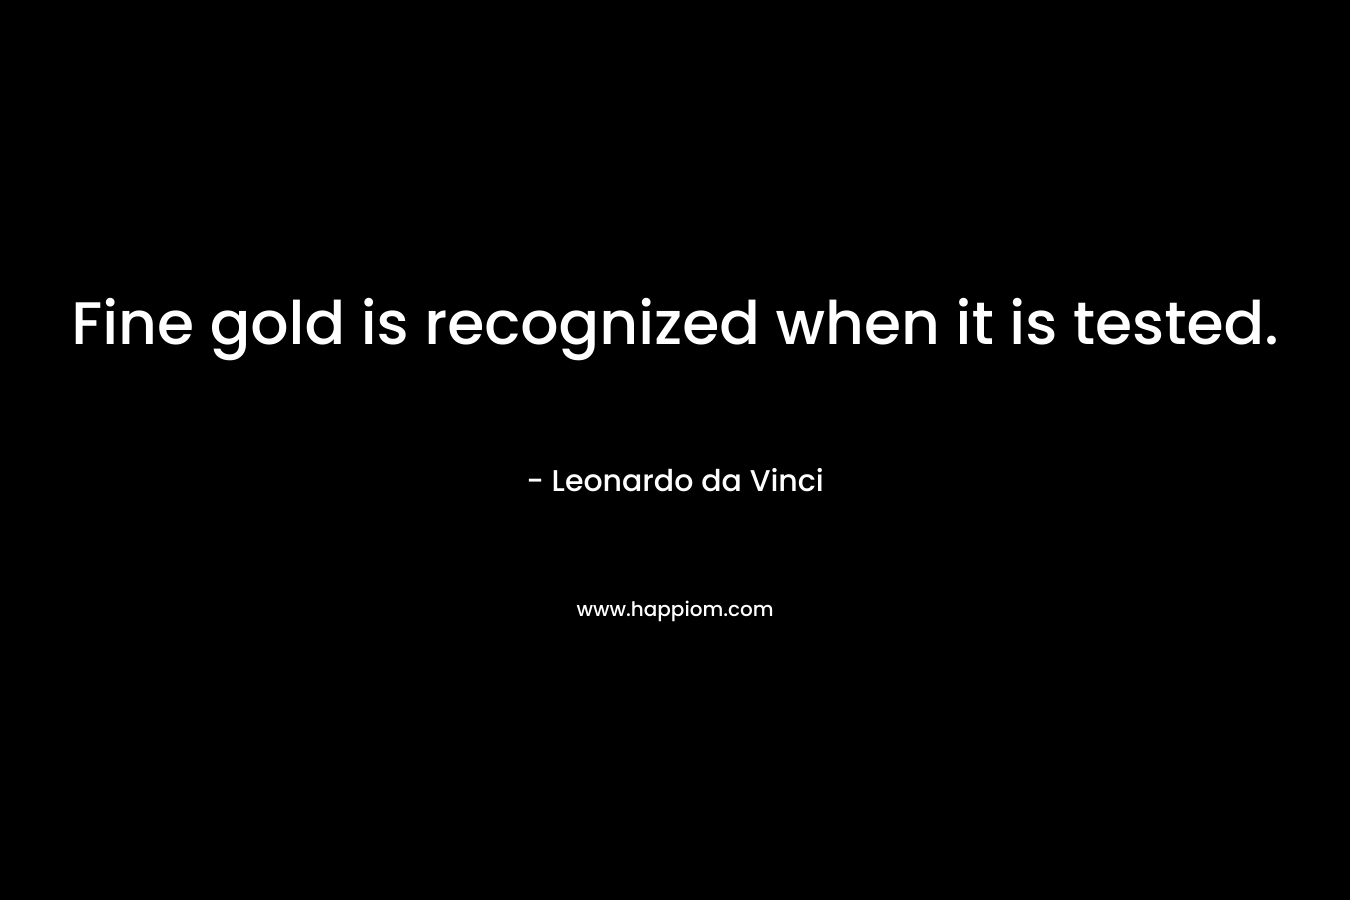 Fine gold is recognized when it is tested.